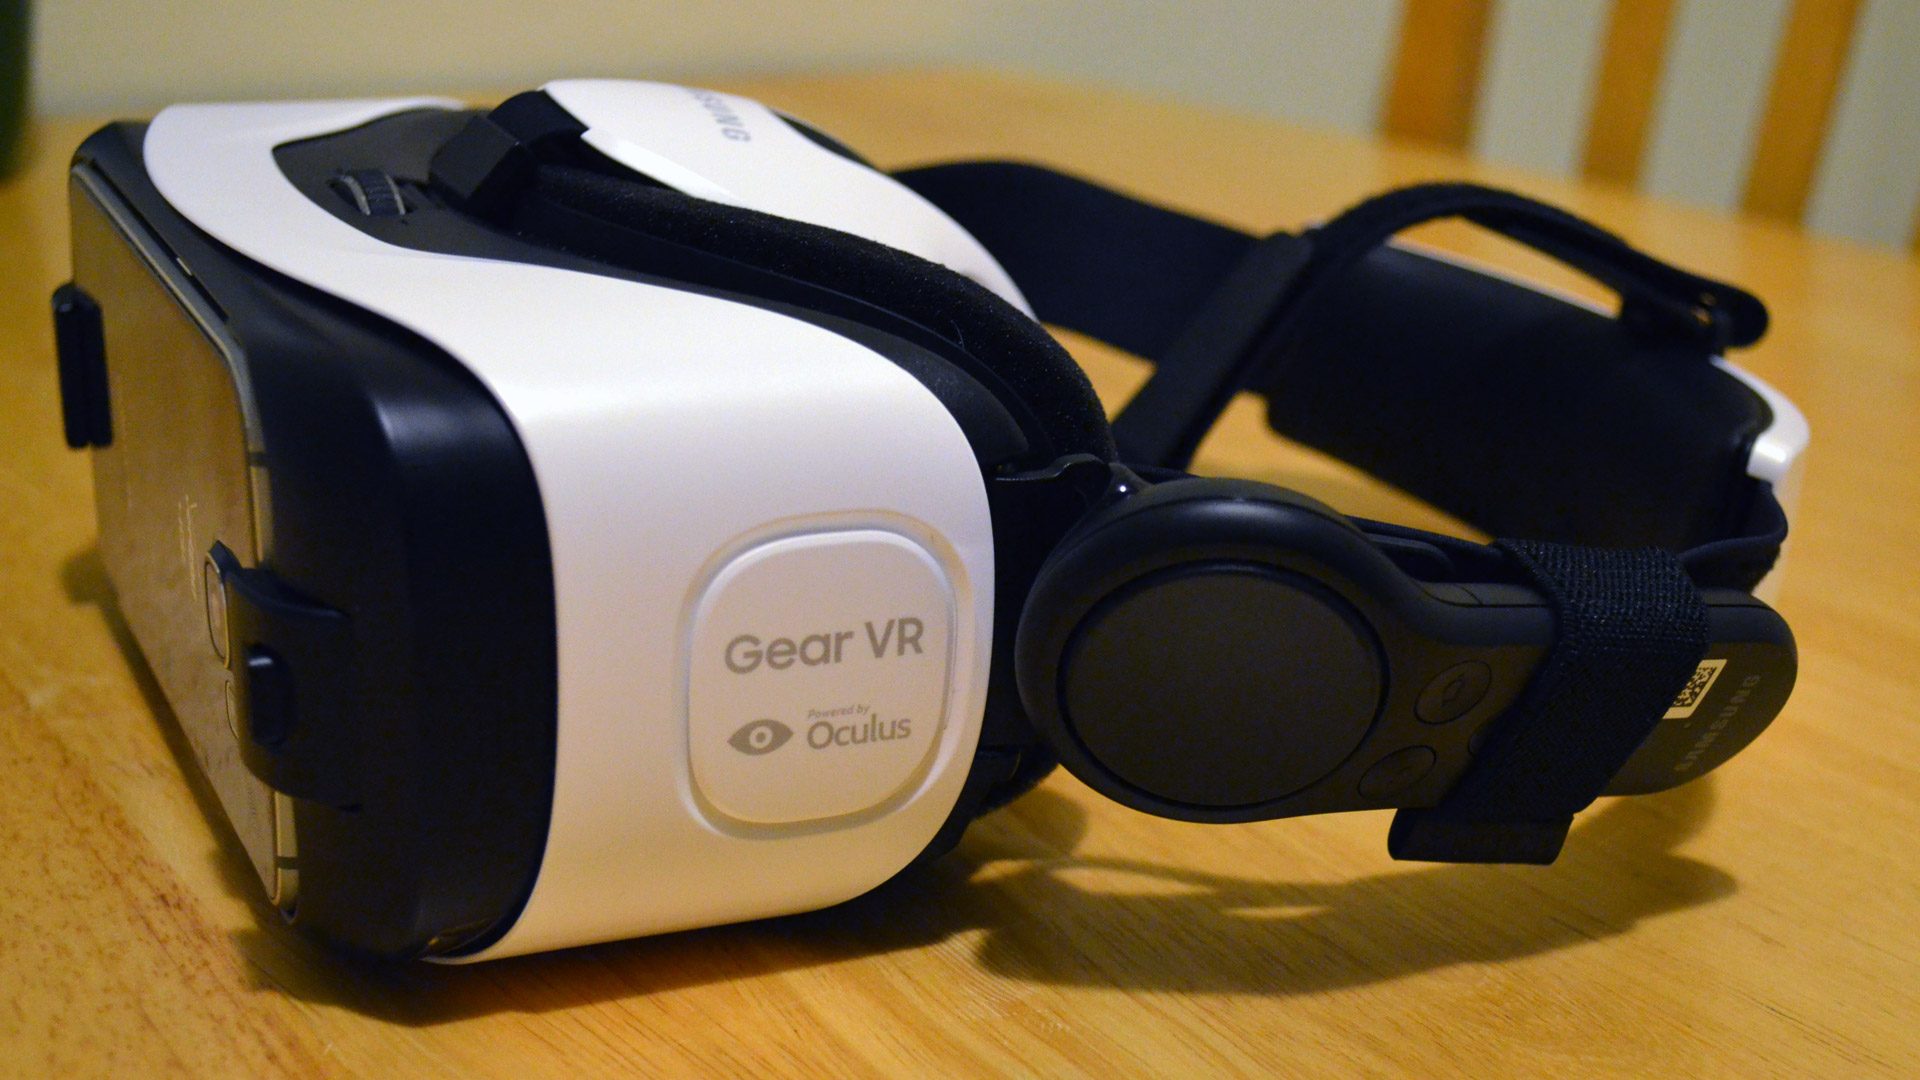 samsung galaxy vr with controller